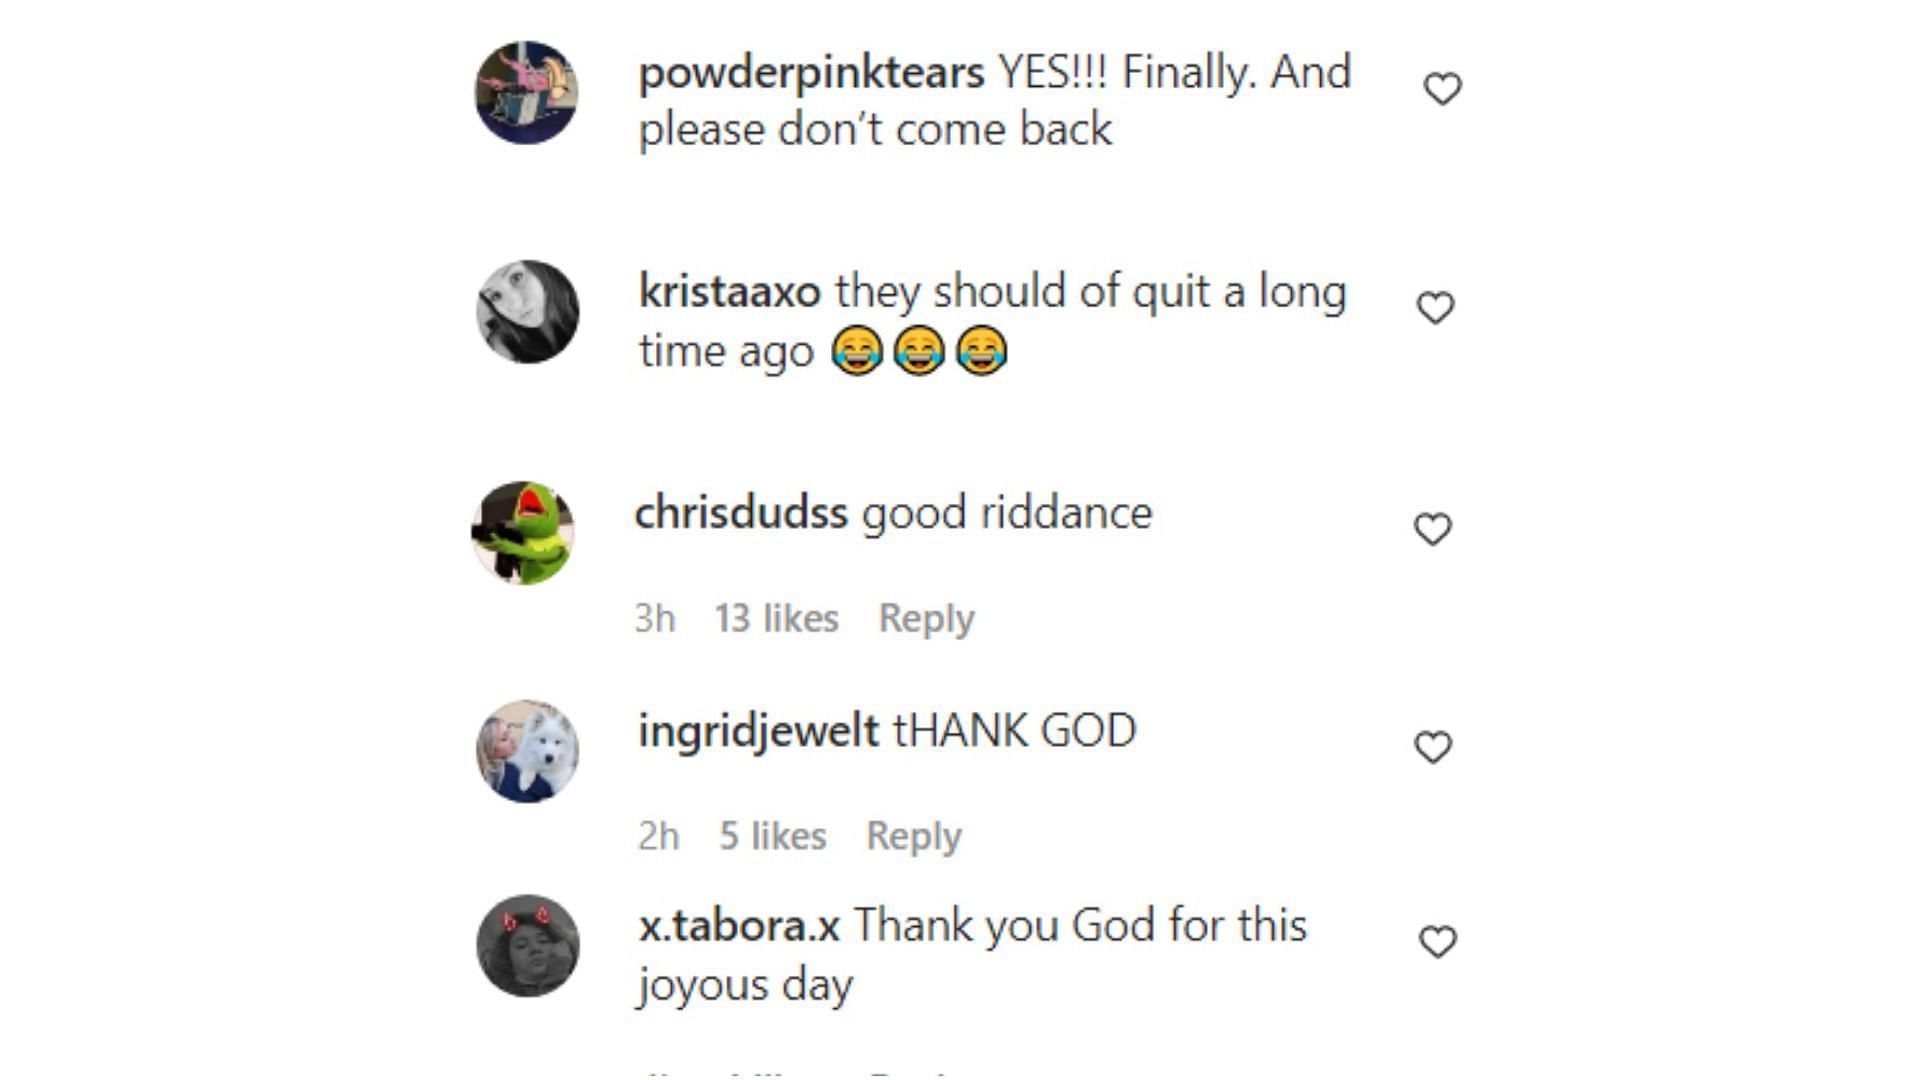 Instagram users comment on the McBrooms leaving YouTube (1/2) (Image via defnoodles/Instagram)